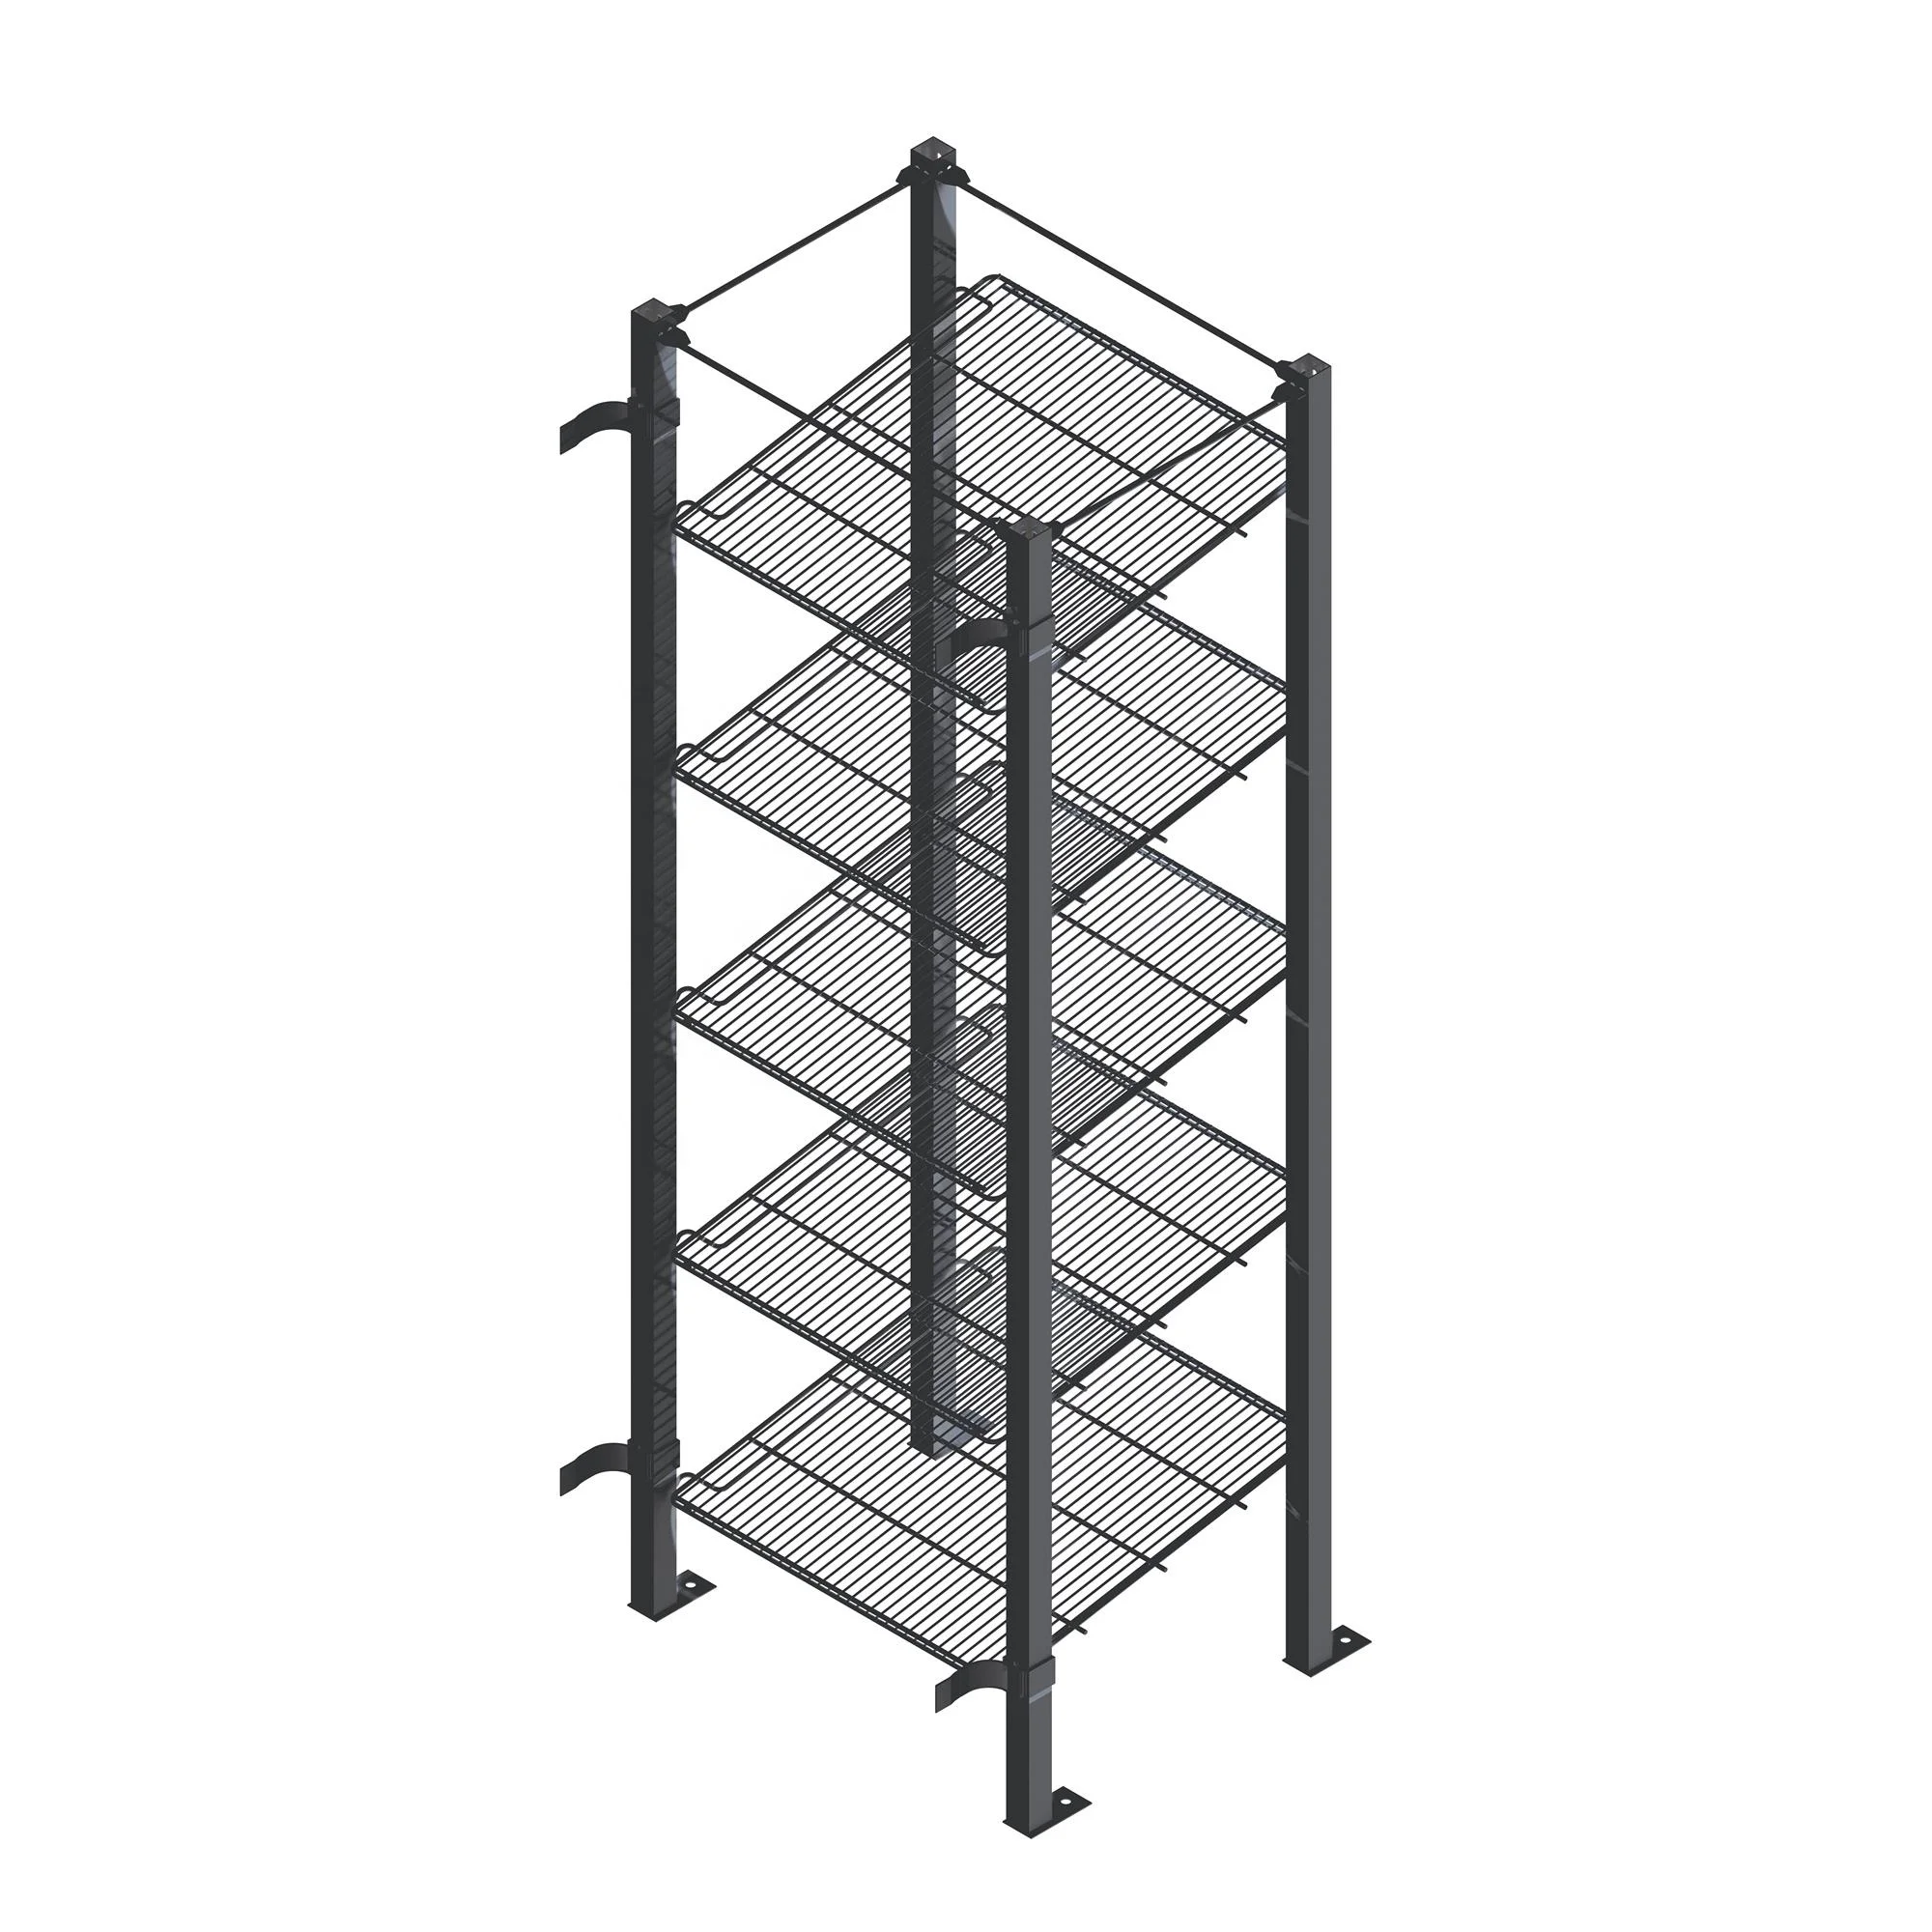 Gravity Feed Shelf Rack For Beer Caves & Walk-In Coolers